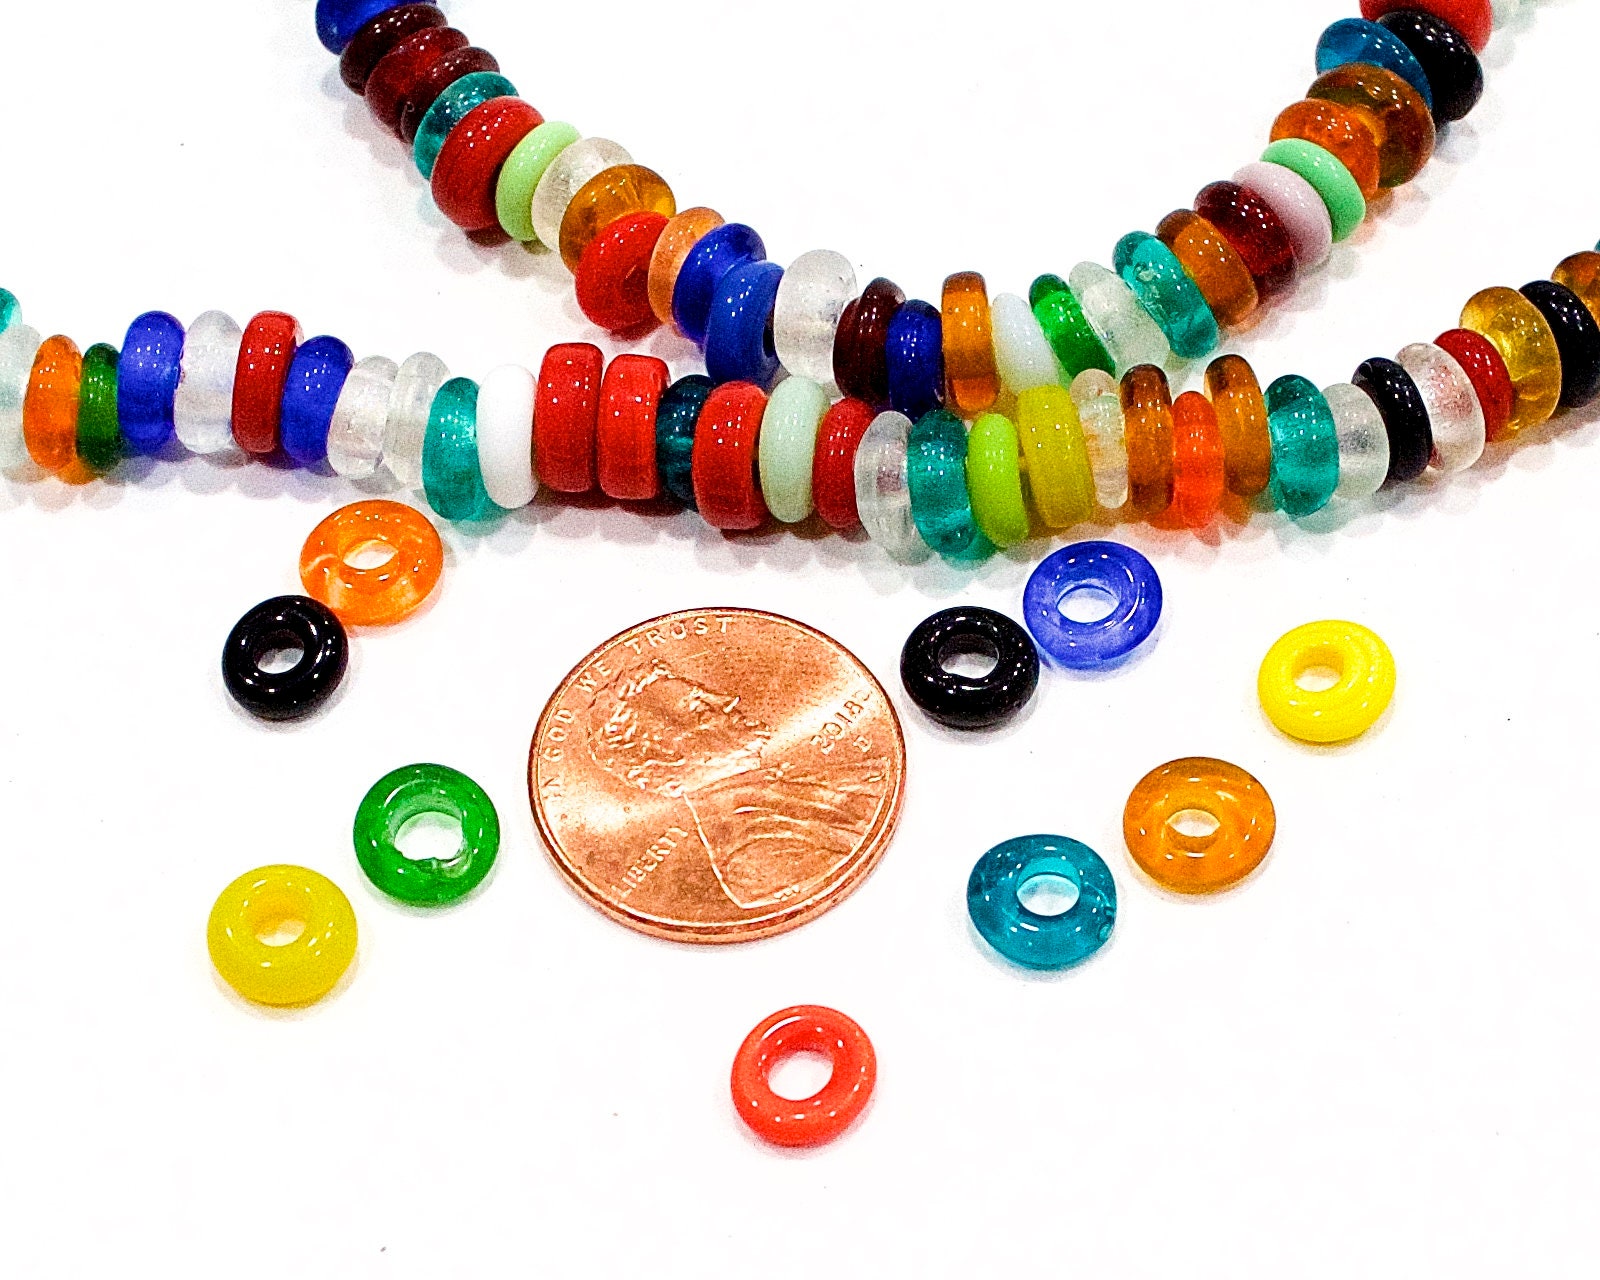 SUPPLY: 500pcs Colorful Glass Crow Roller Flat Beads Macrame Beads